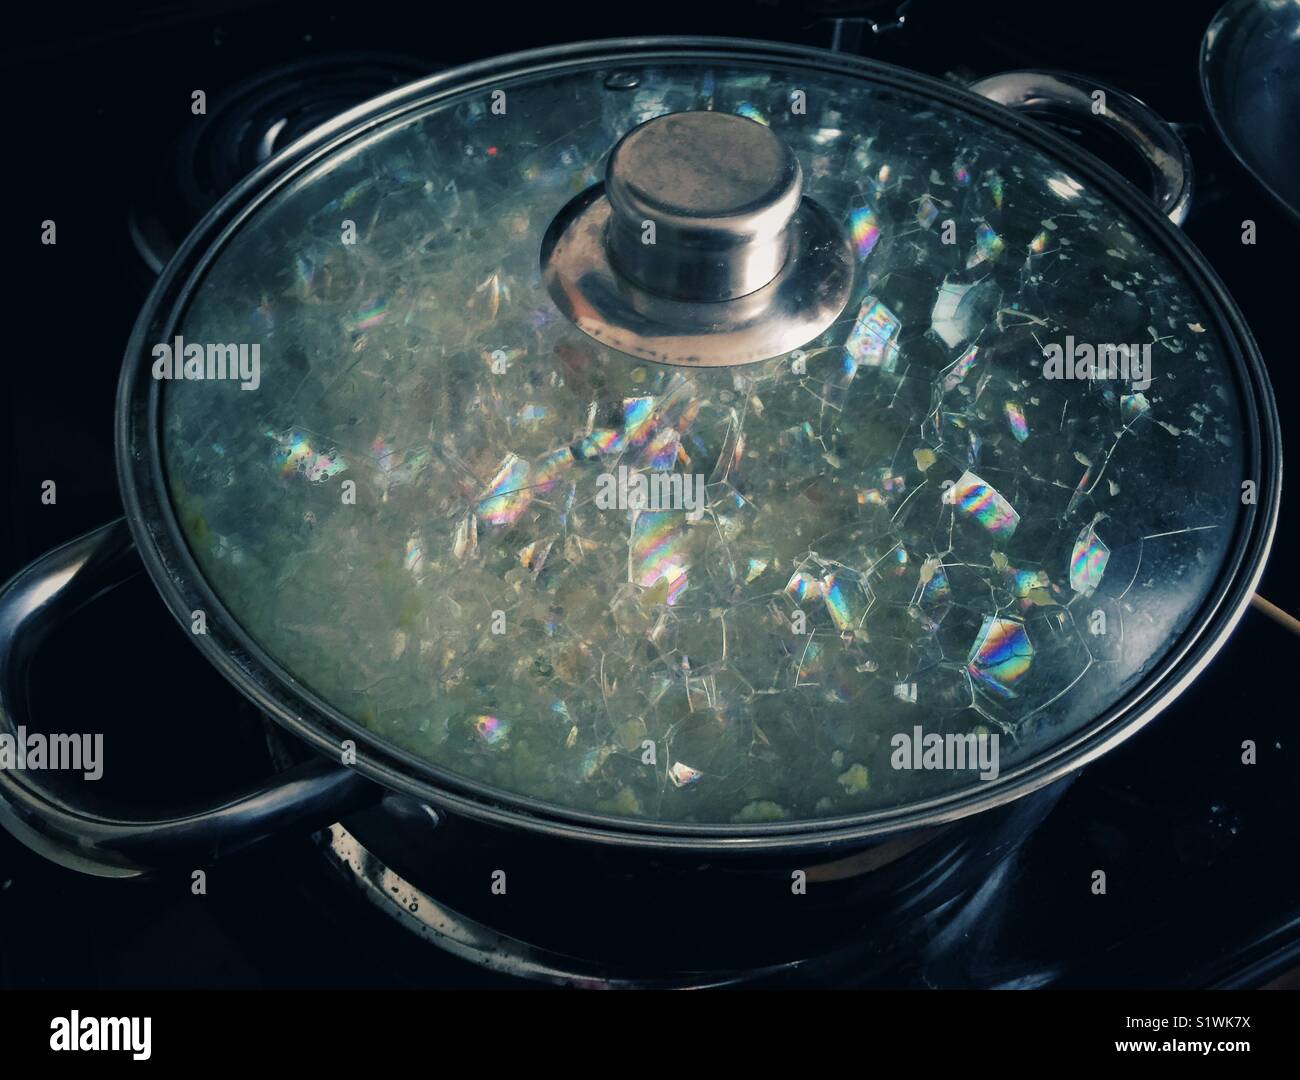 Boiling Pot of Water on Stove With Copy Space Stock Photo by ©whitestar1955  275925416